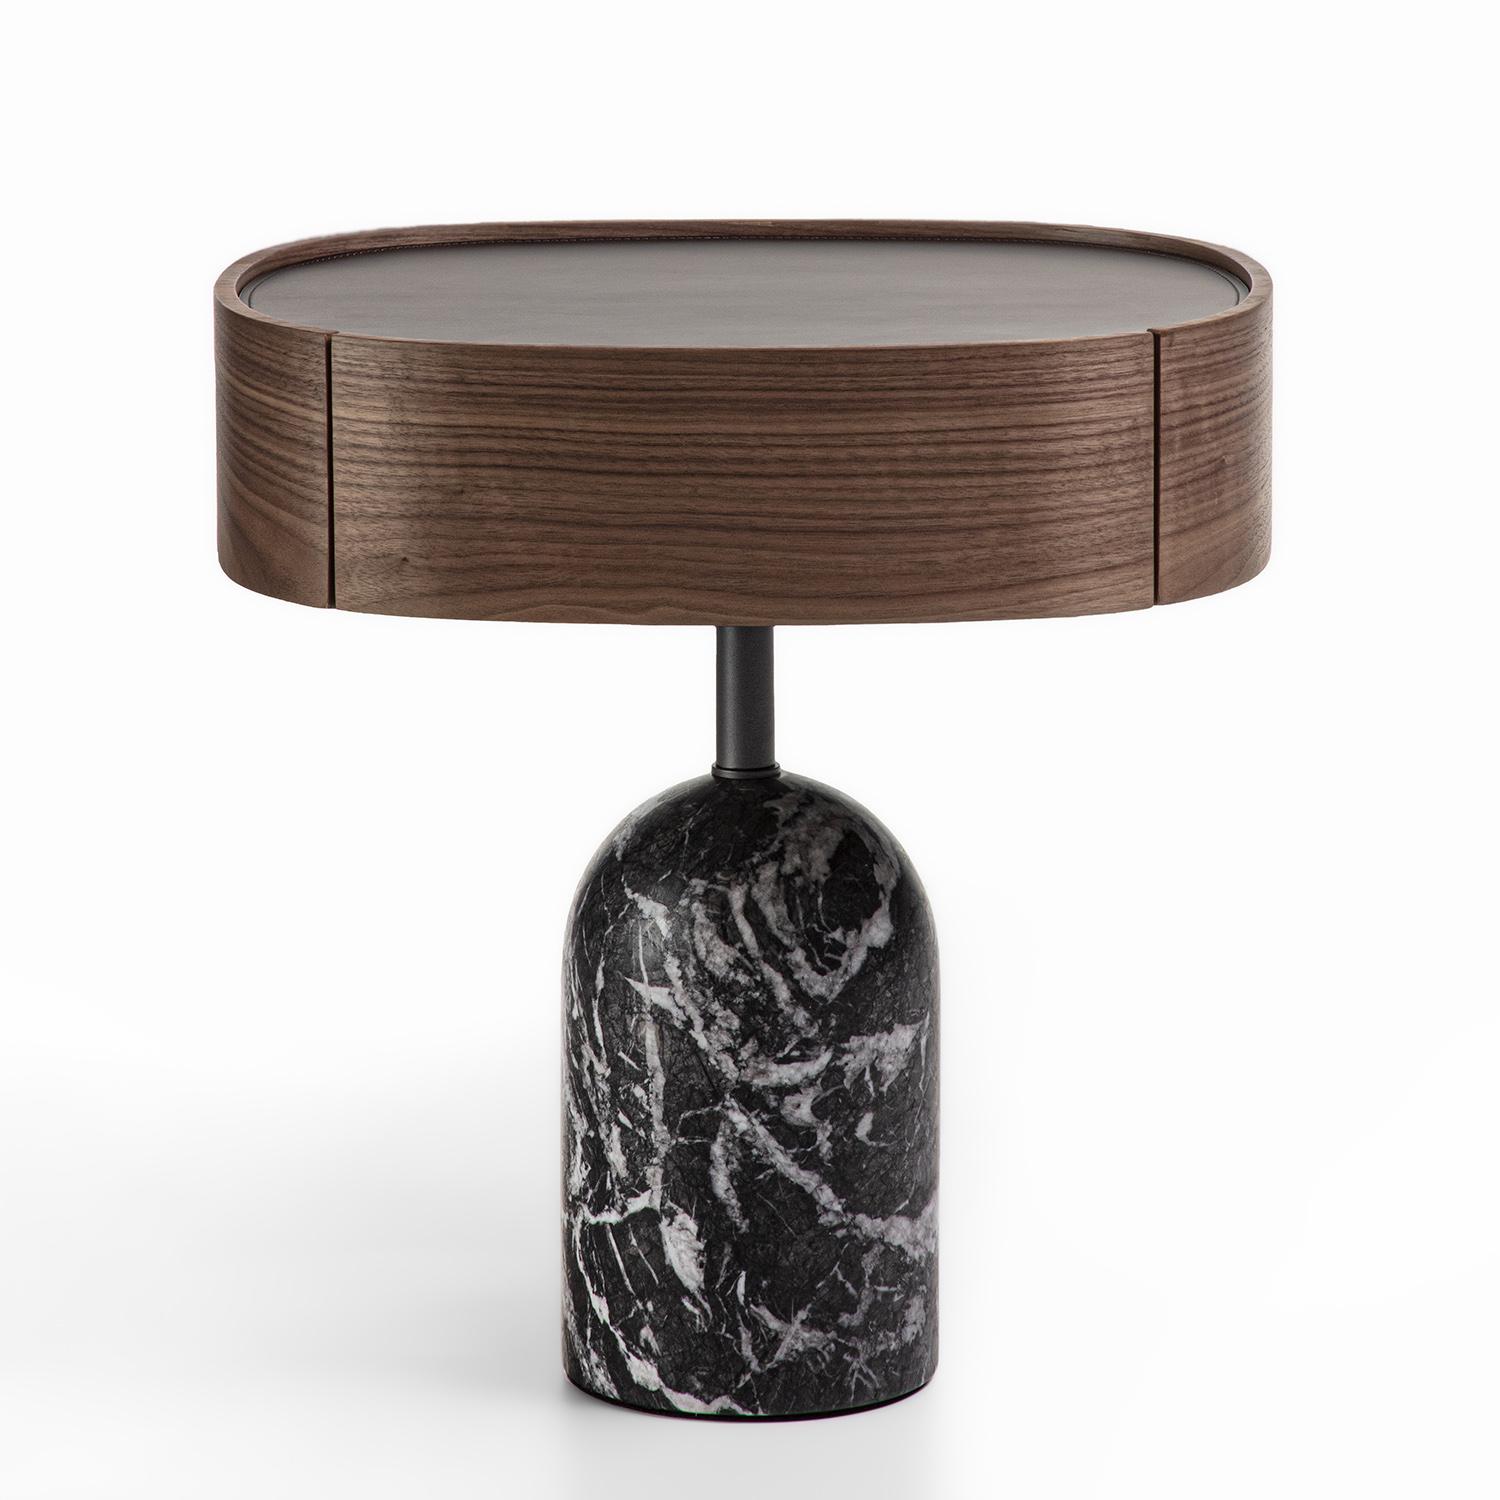 Bedside Table Stelle Night Gray with base in solid gray polished marble,
with metal pole in iron finish ans with solid walnut top with 1 drawer. Top
covered with black genuine leather.